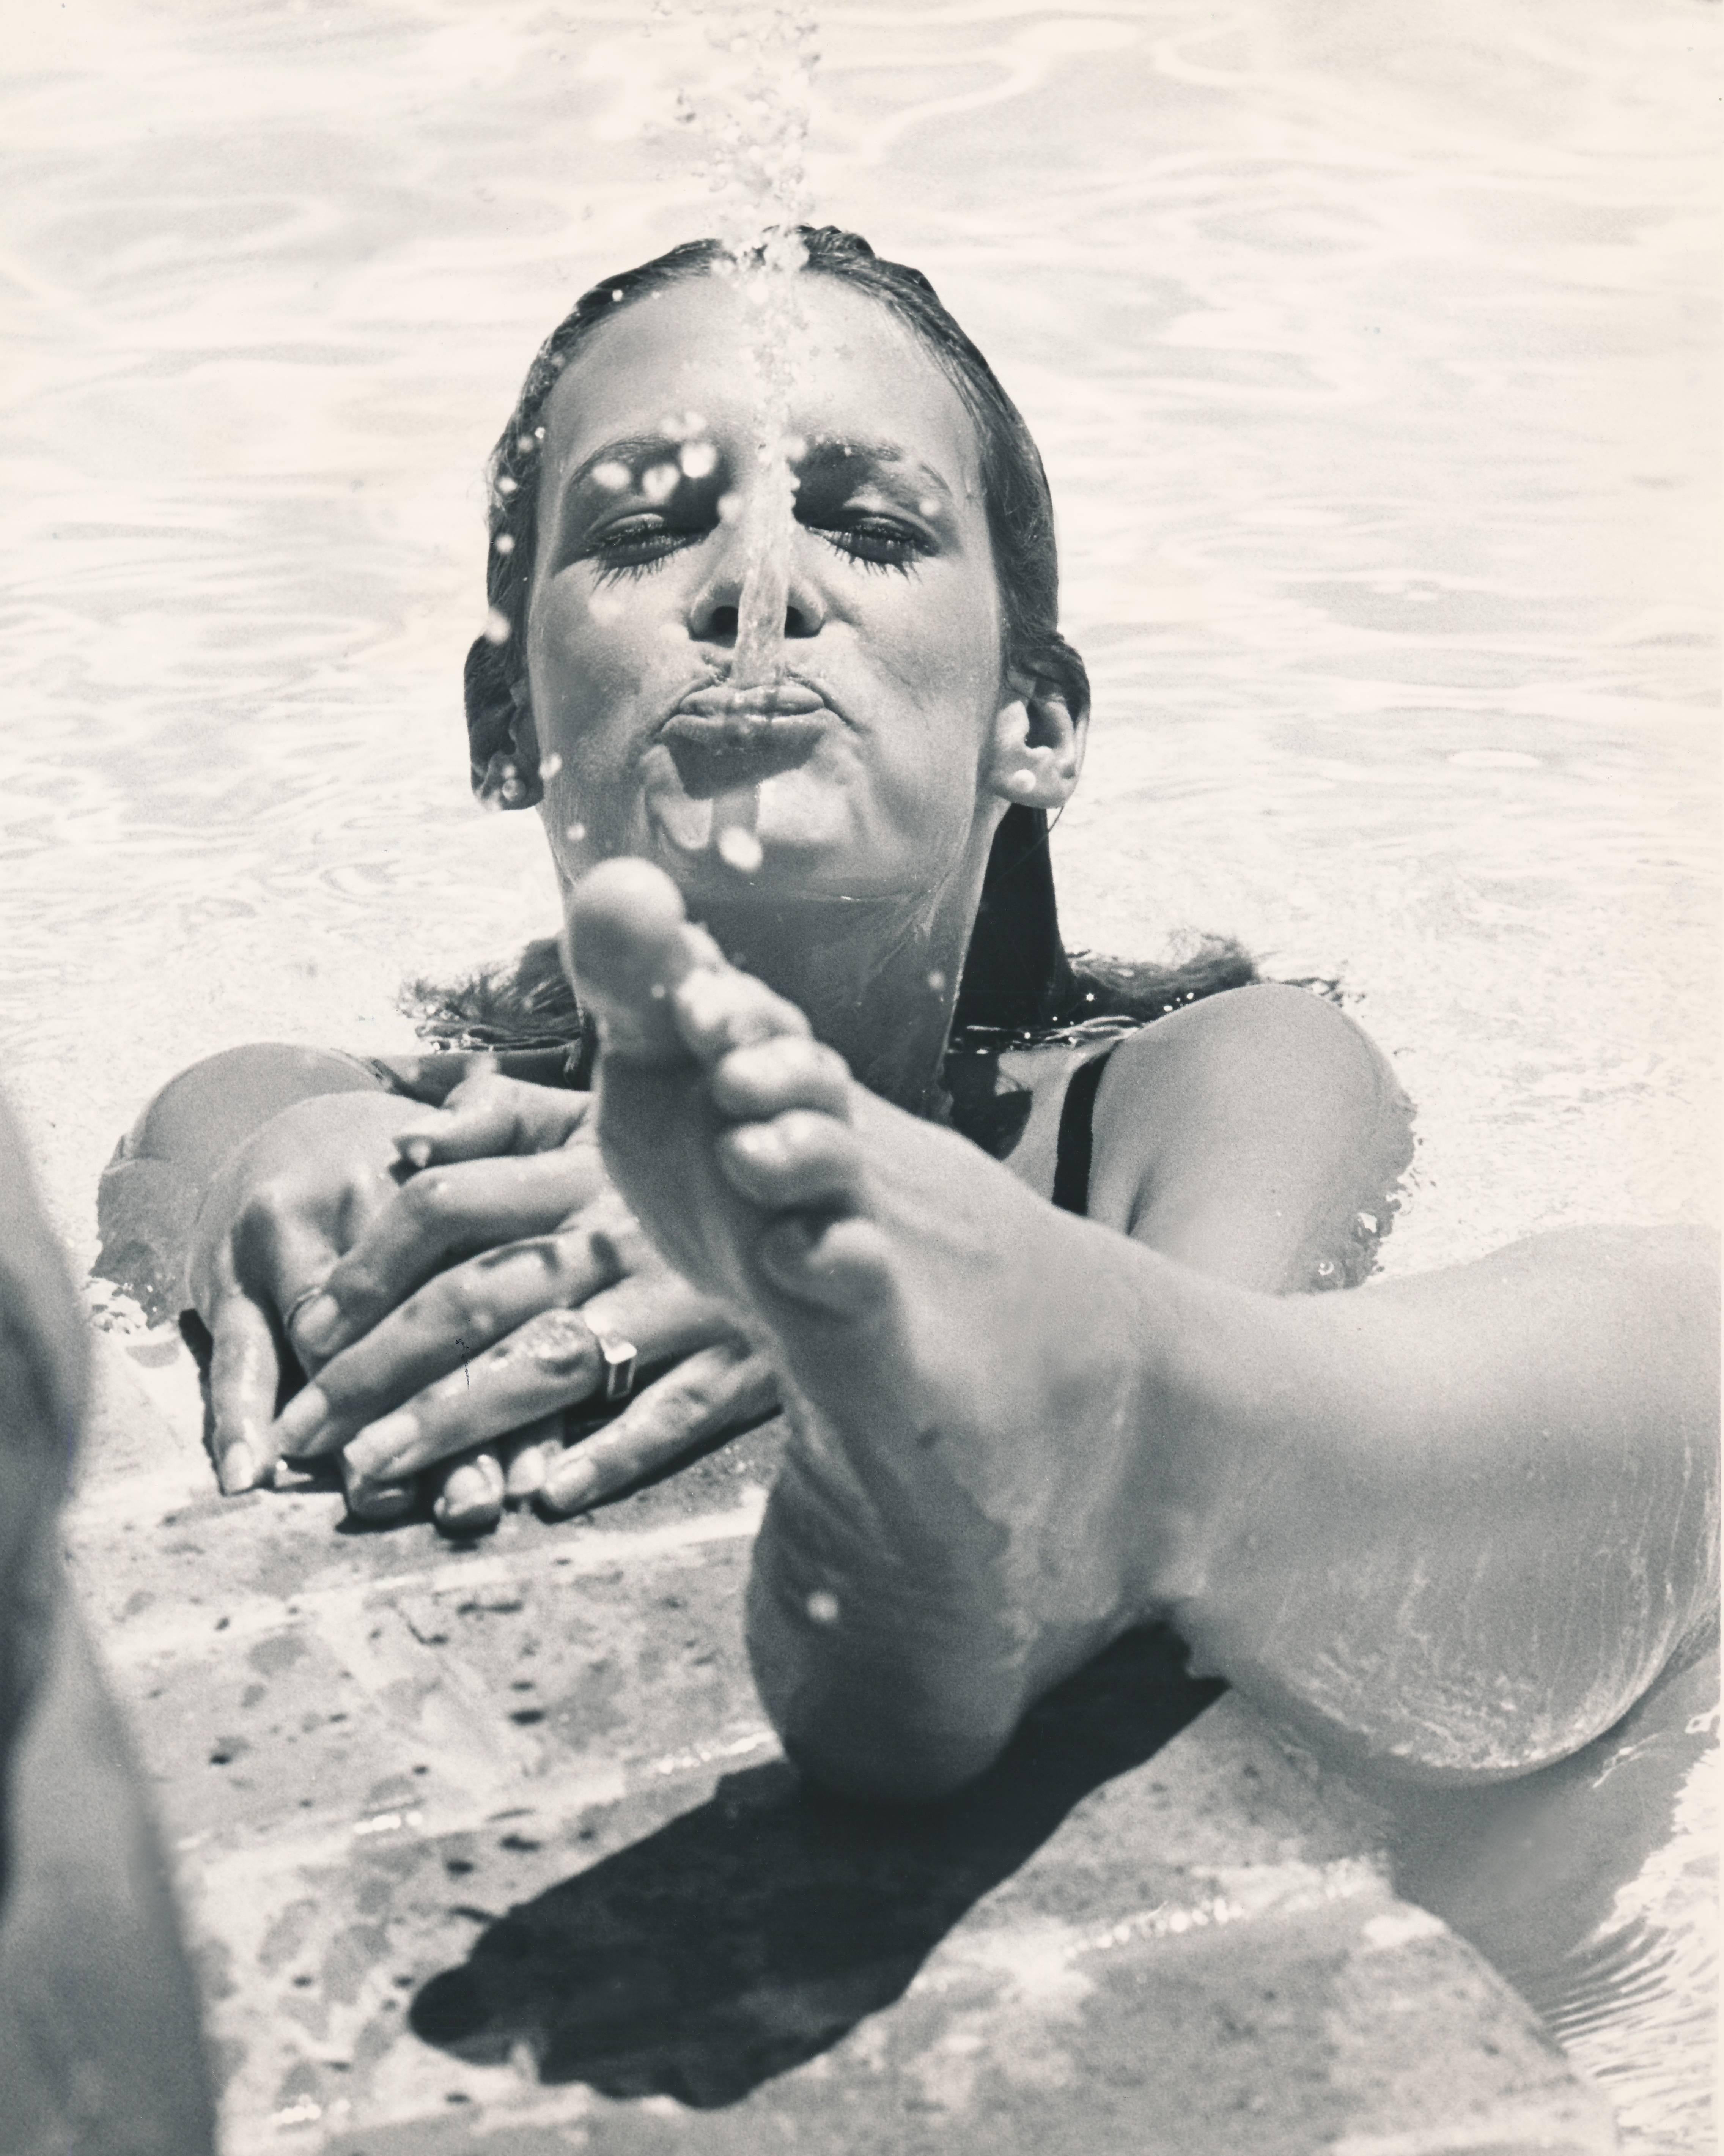 Unknown Portrait Photograph - Jamie Lee Curtis Spitting in Pool Fine Art Print